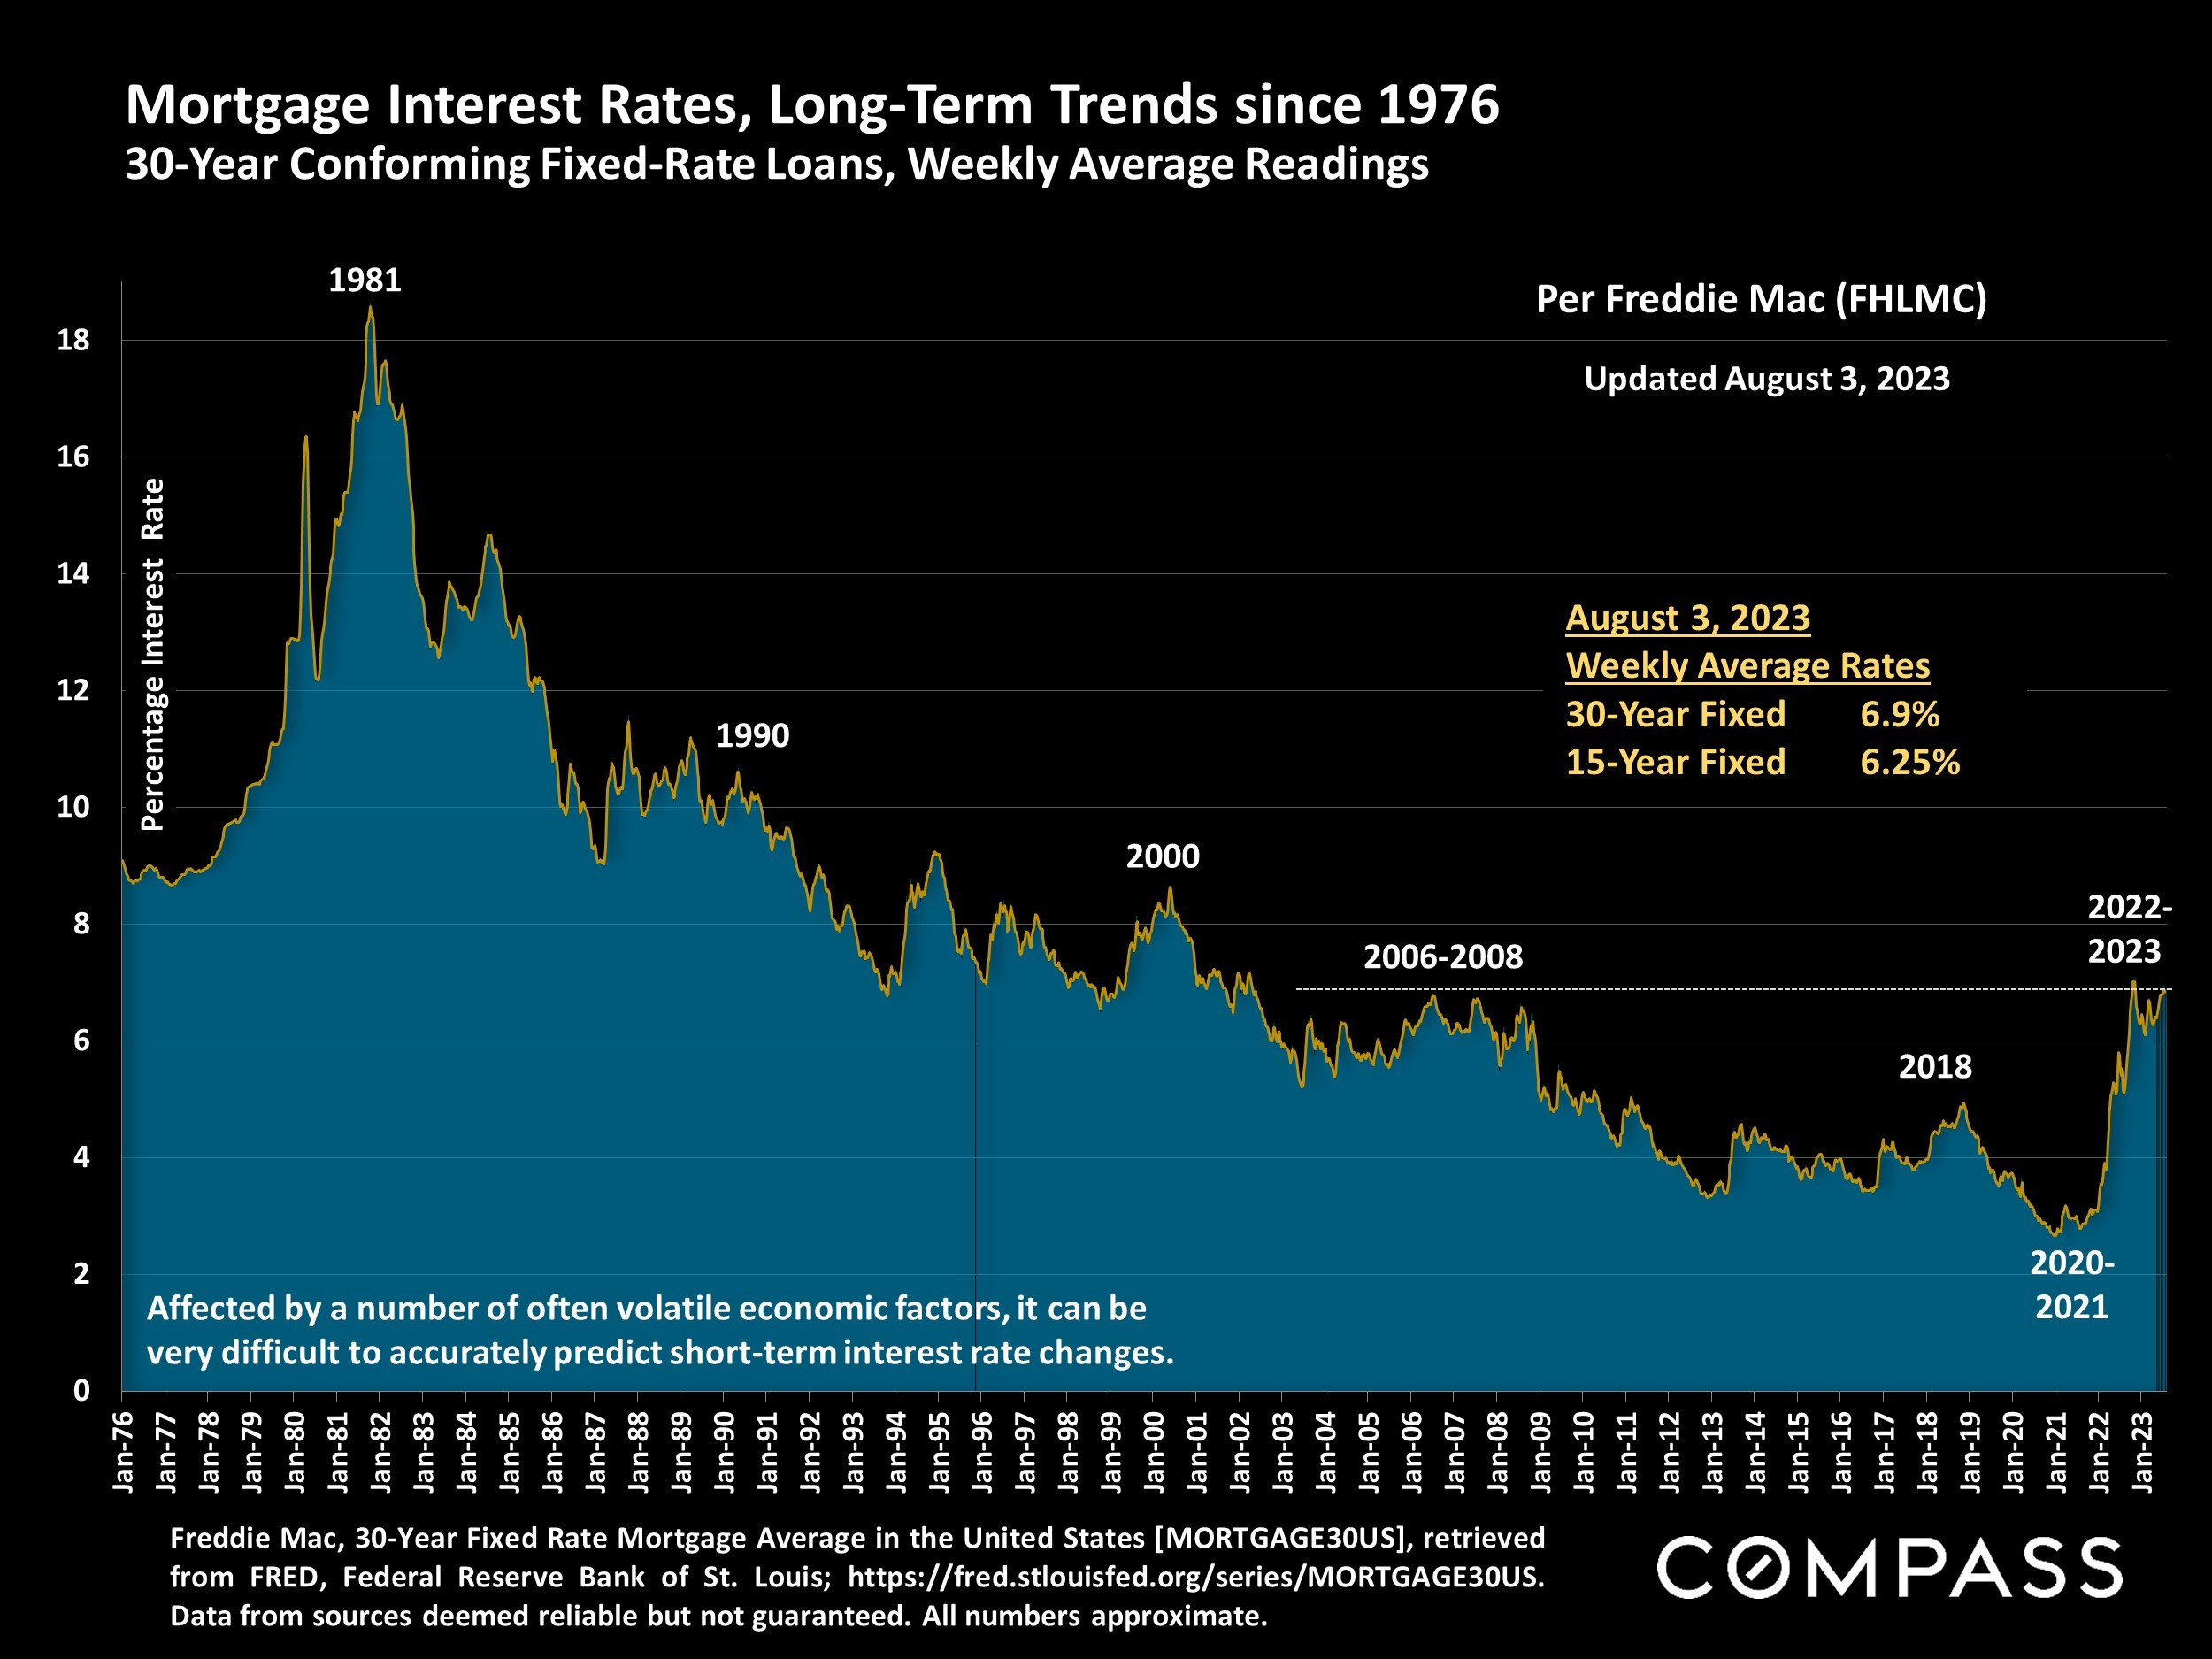 Mortgage Interest Rates, Long-Term Trends since 1976 30-Year Conforming Fixed-Rate Loans, Weekly Average Readings